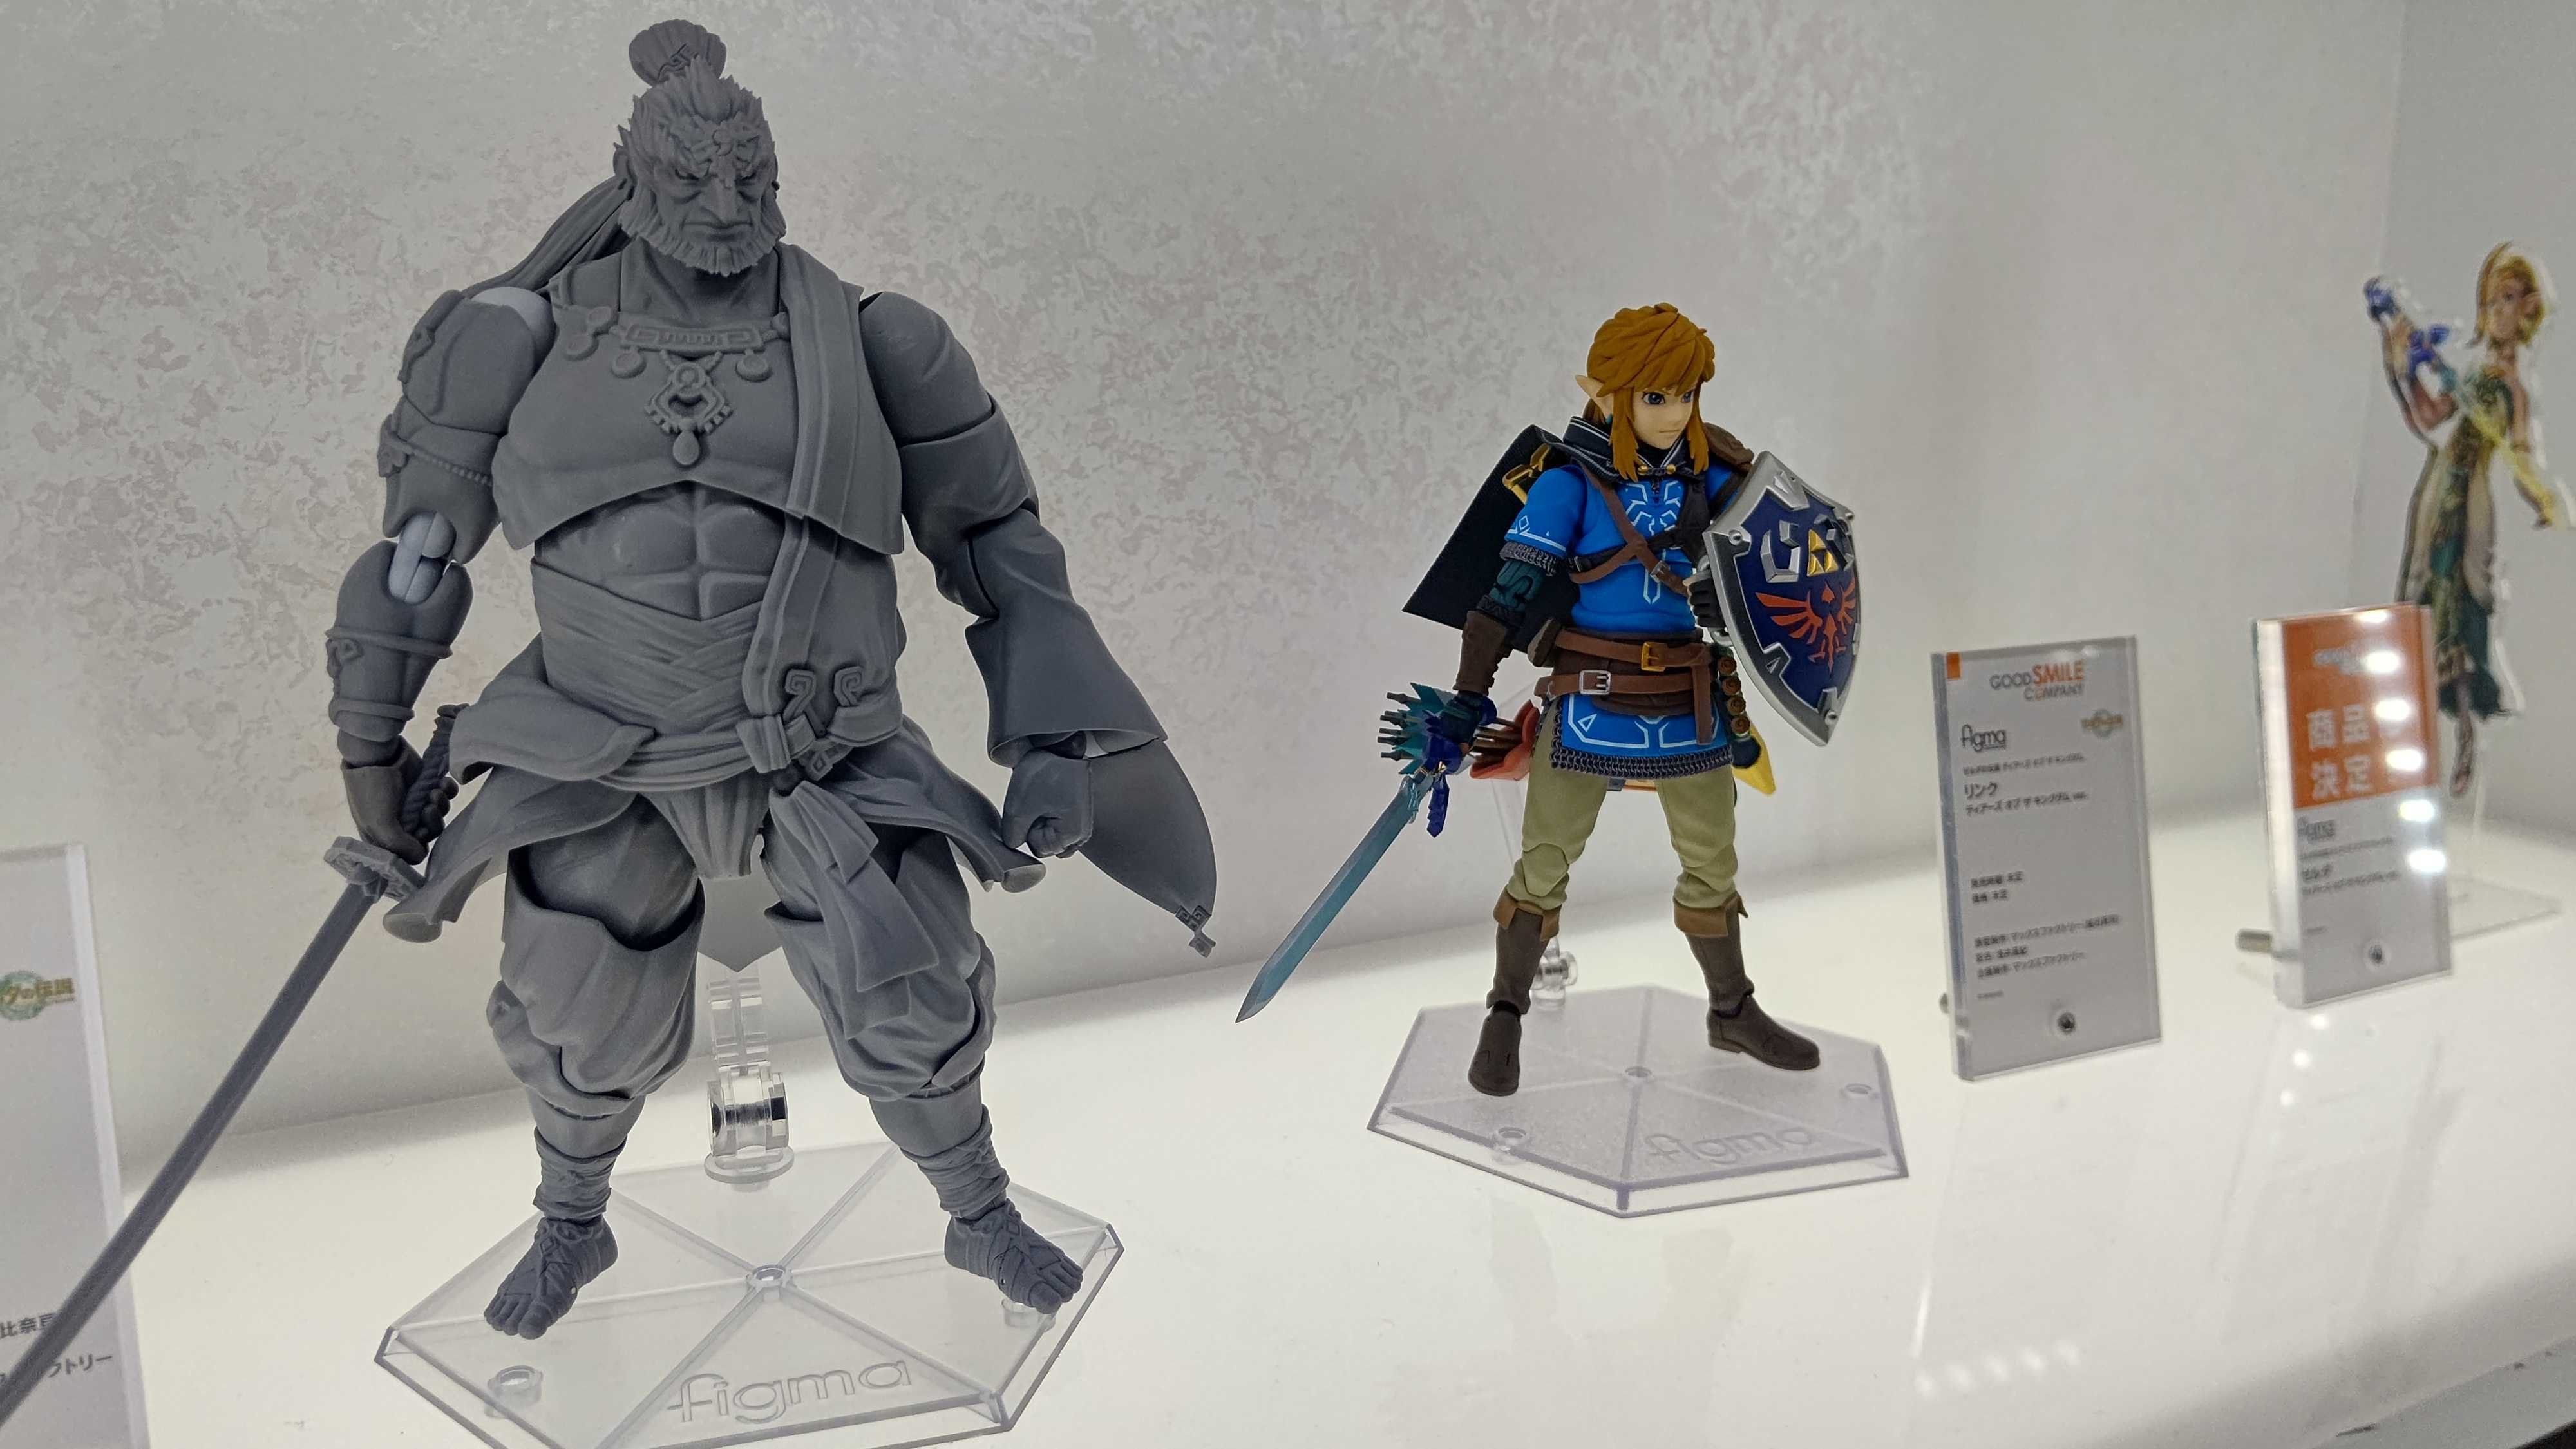 Nintendeal on X: "the new Tears of the Kingdom Ganondorf figure is an  absolute unit https://t.co/THJ4VERA6V" / X